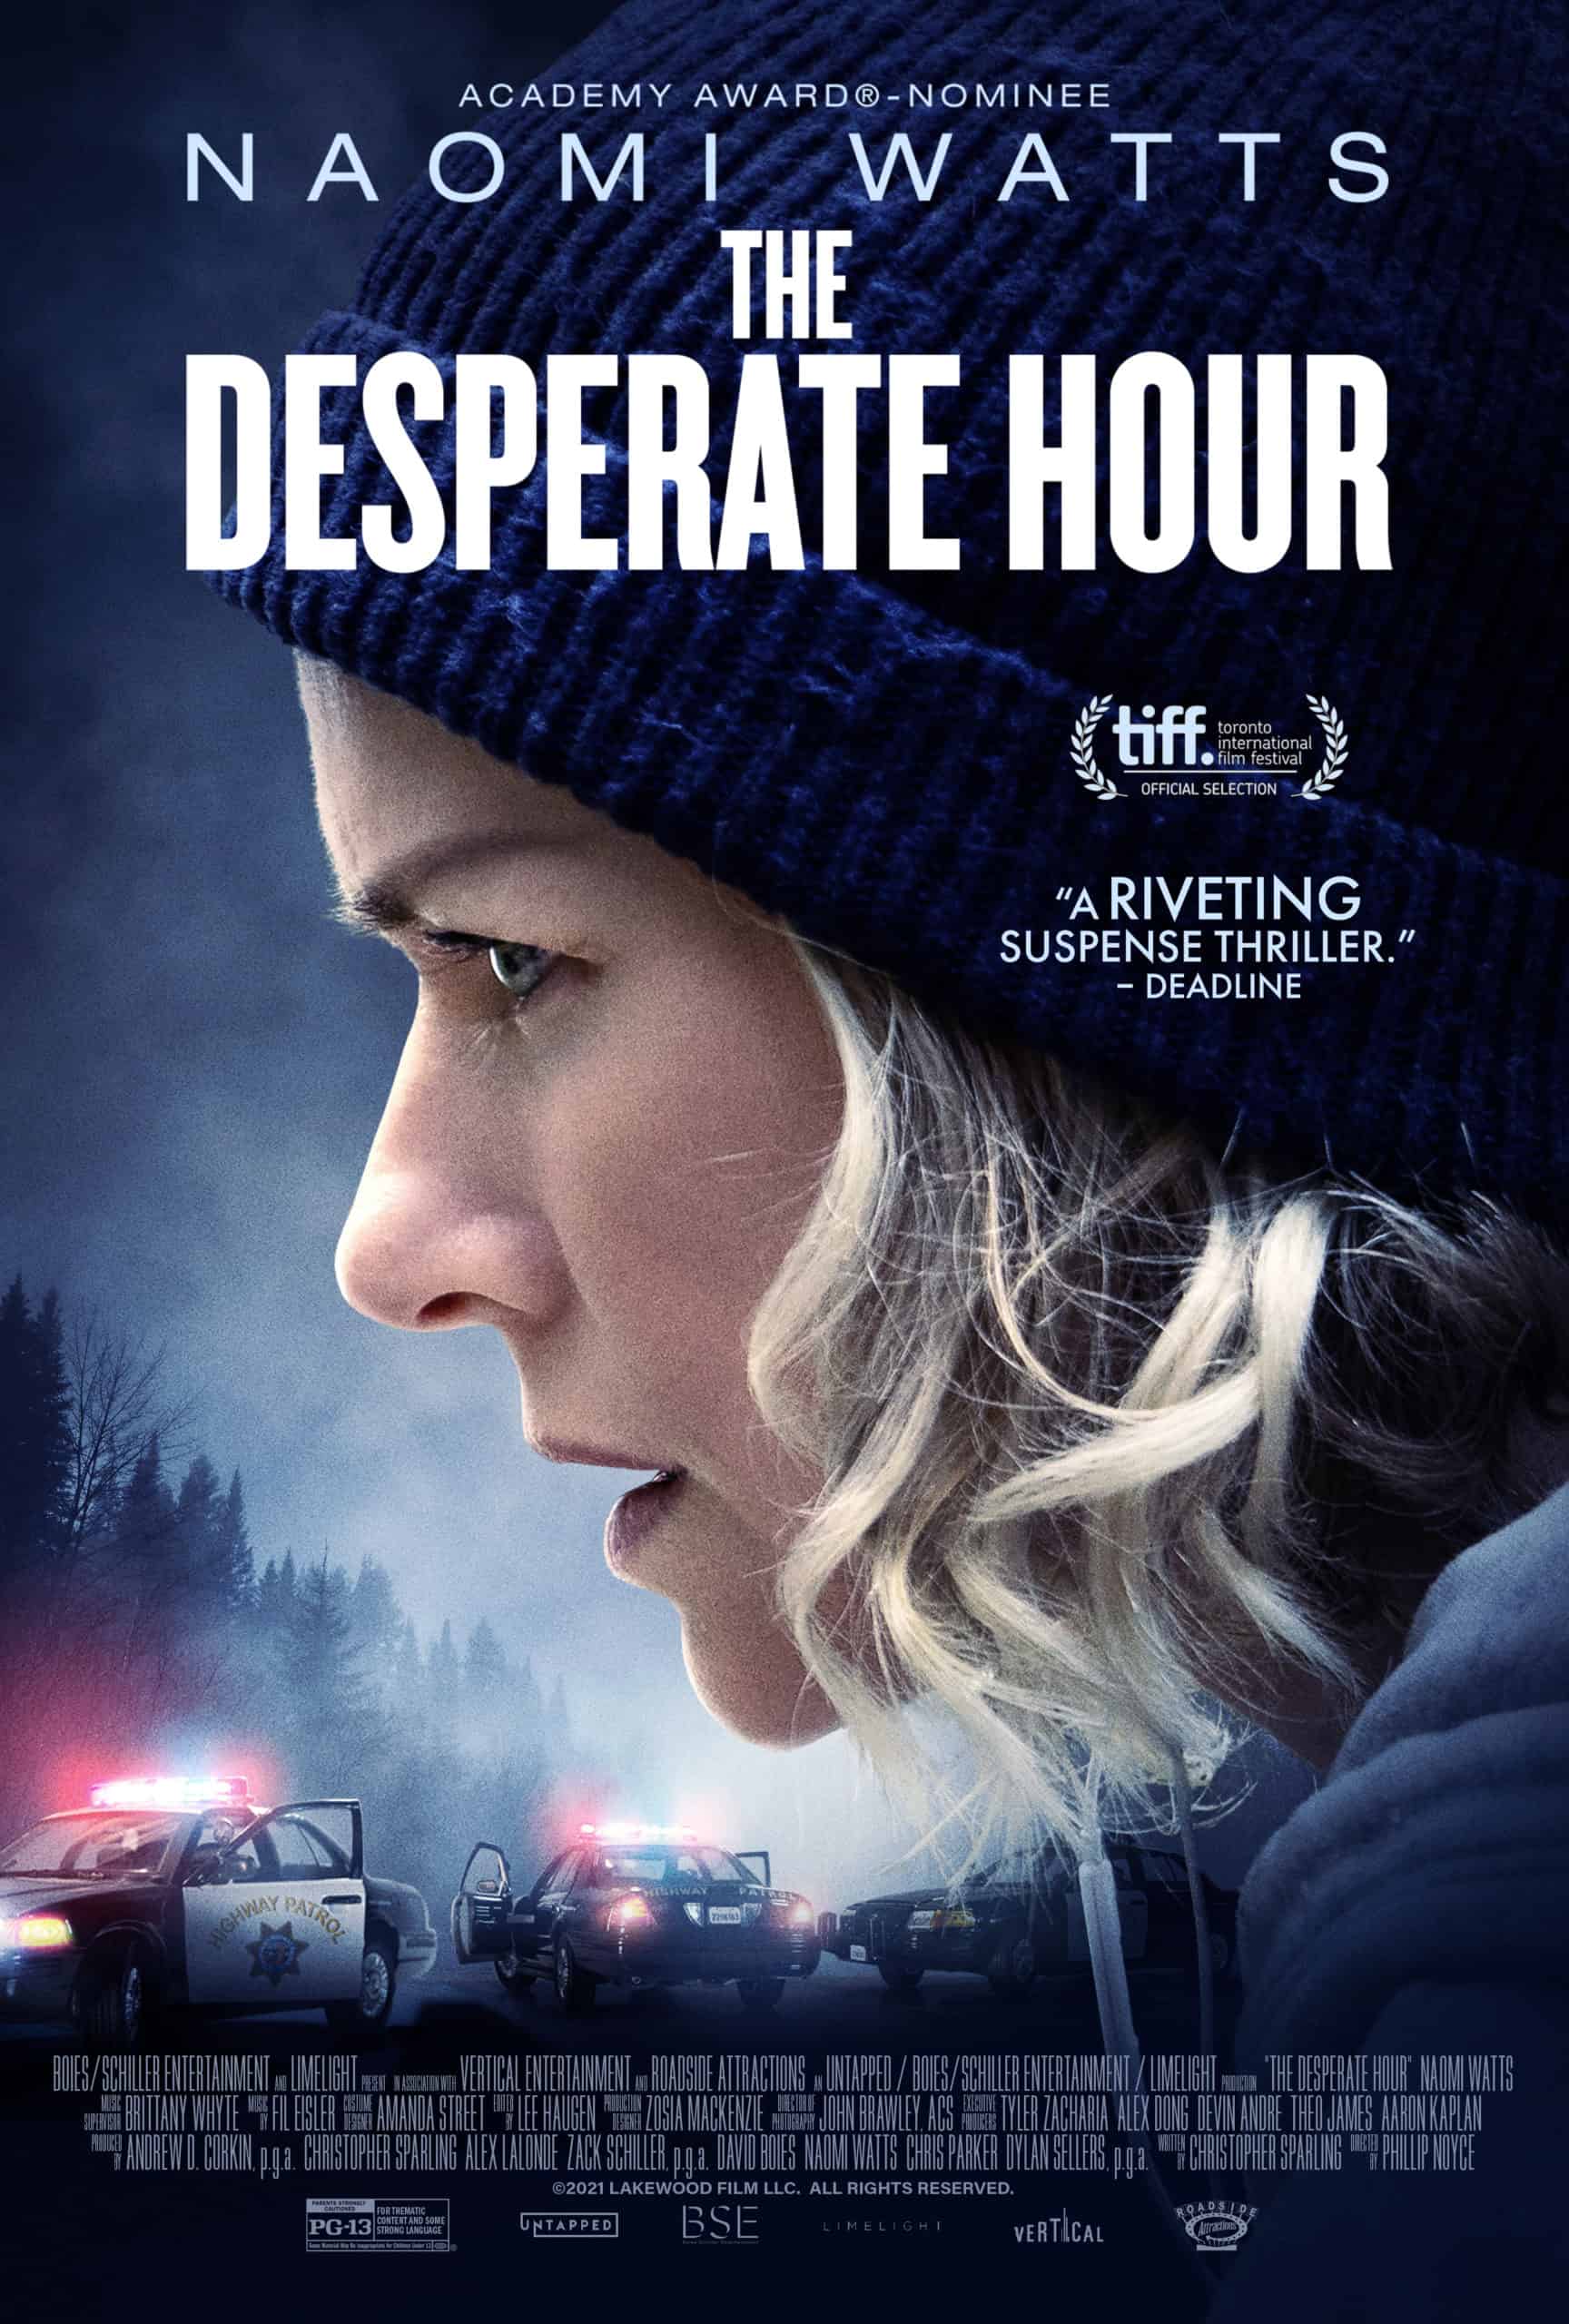 The Desperate Hour poster